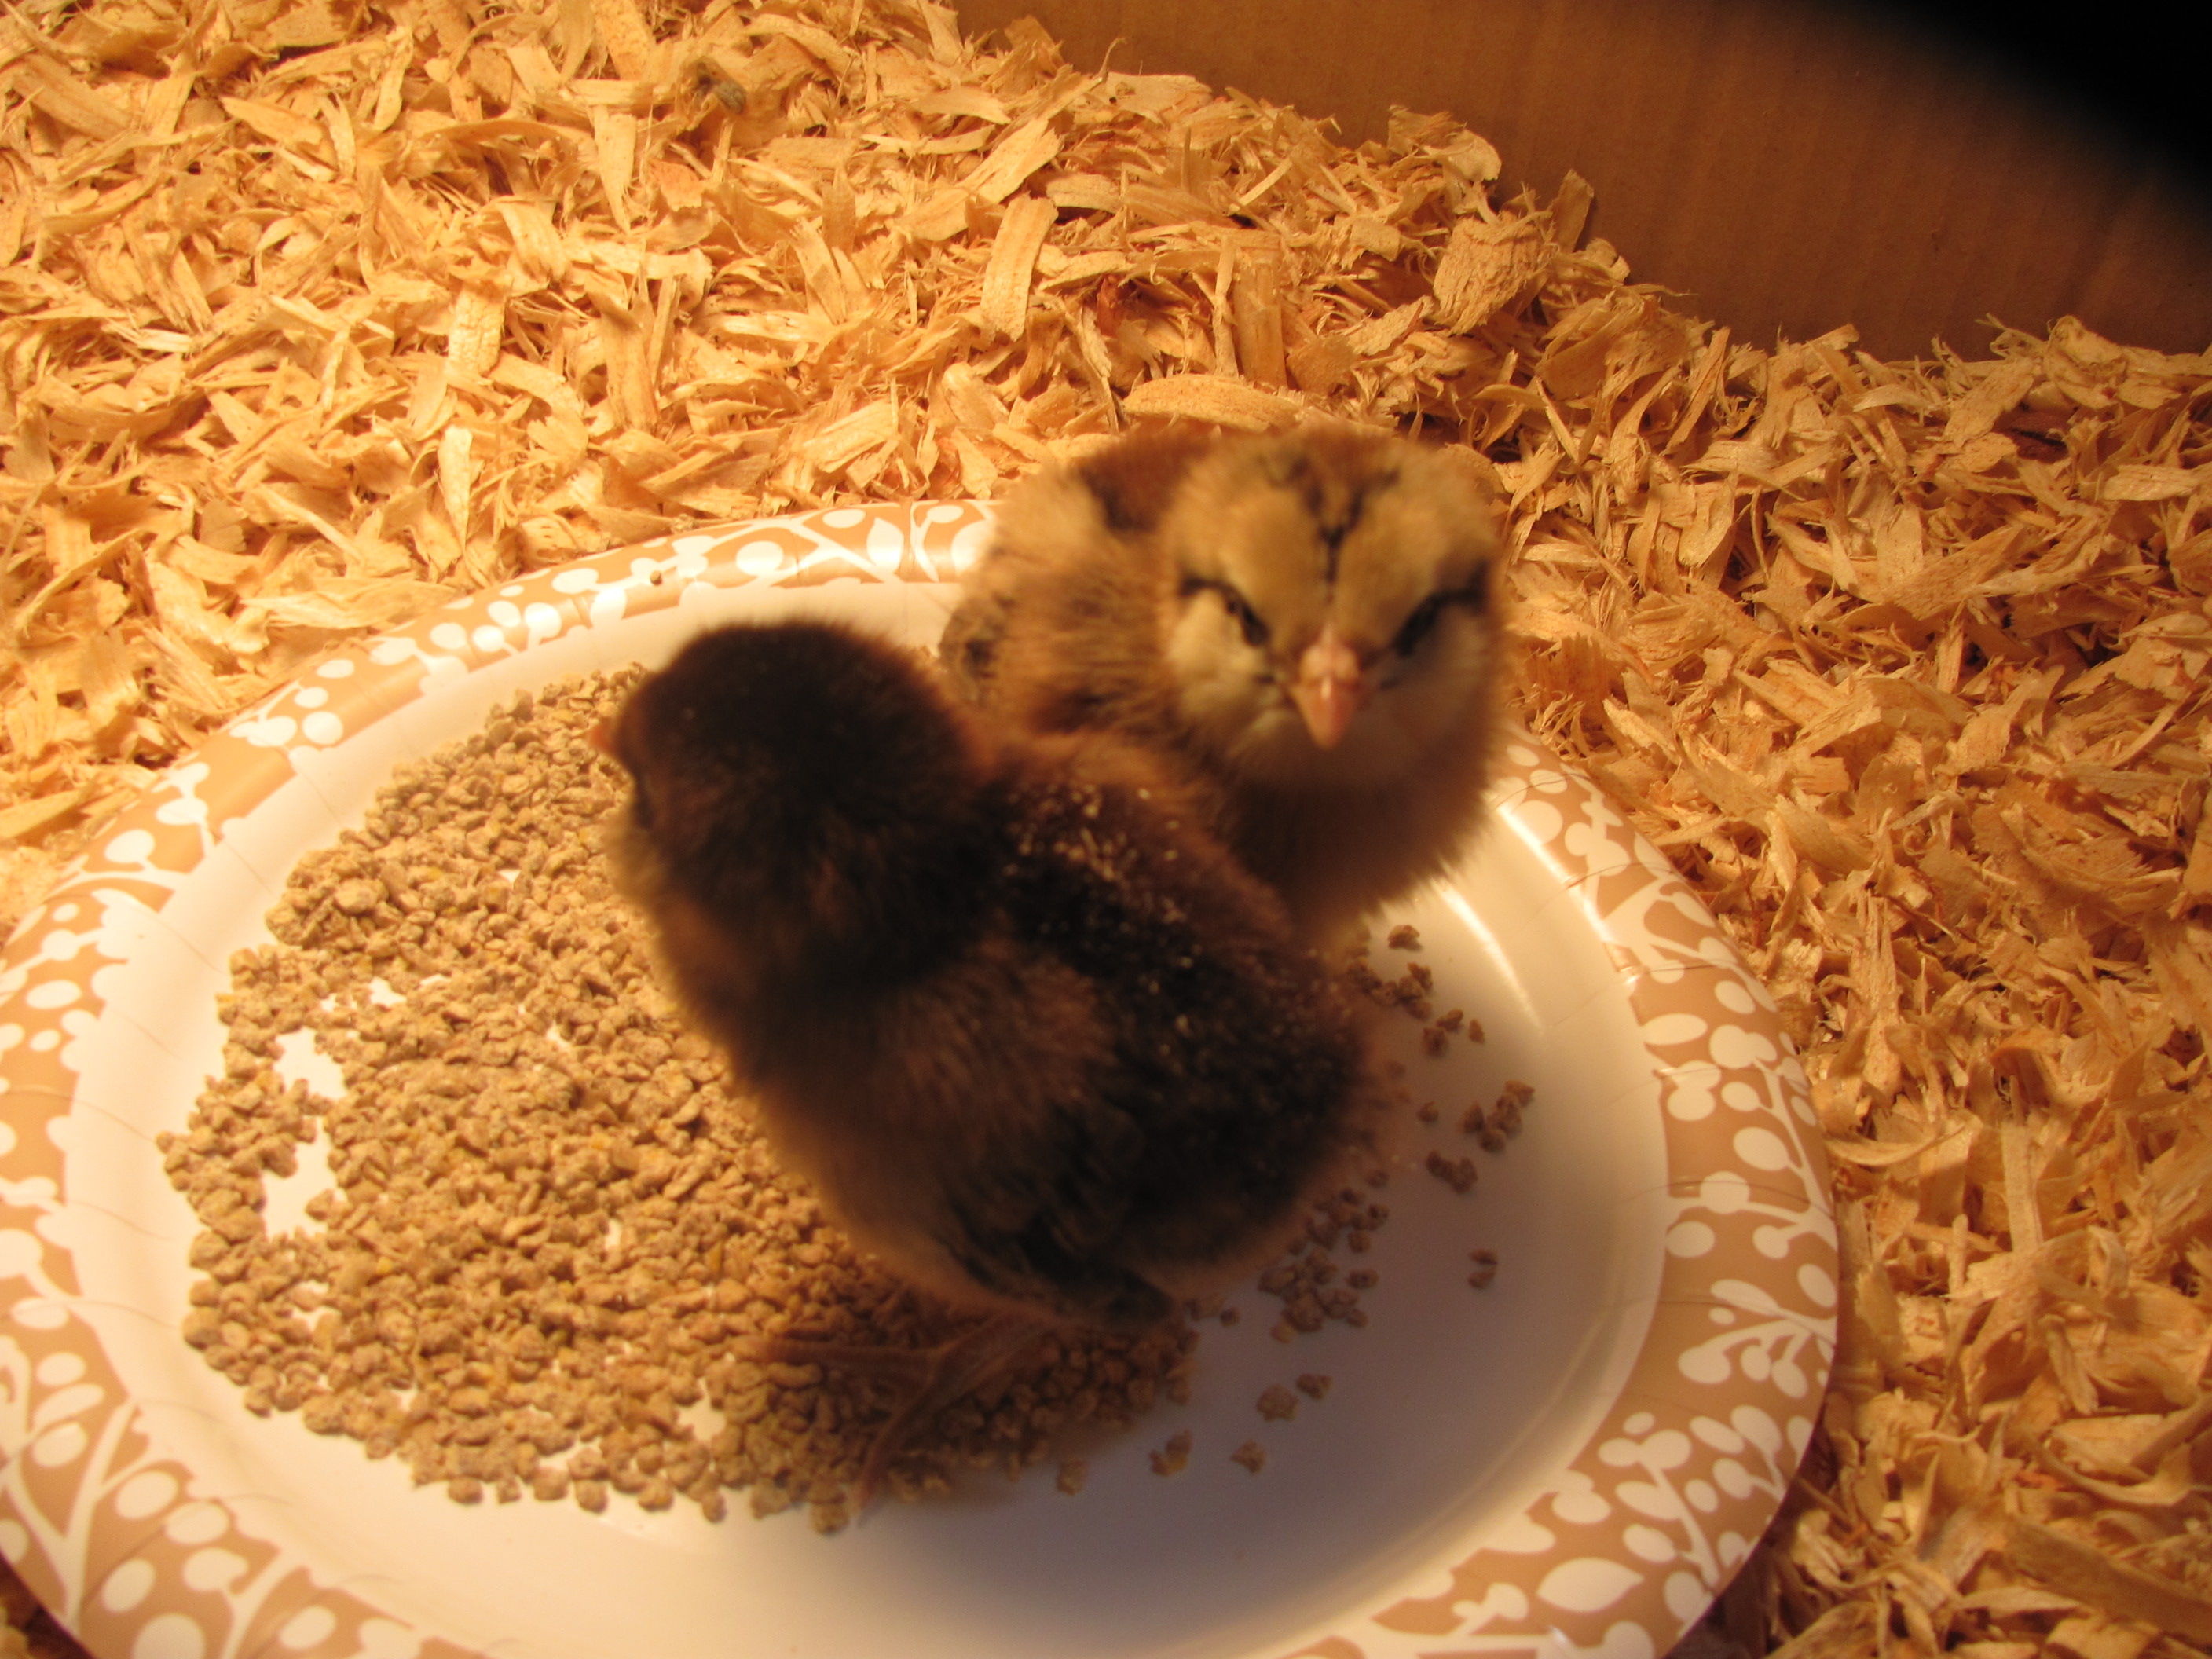 Our two new Ameraucana chicks:  The dark one is Alma and the light one is Aurora.